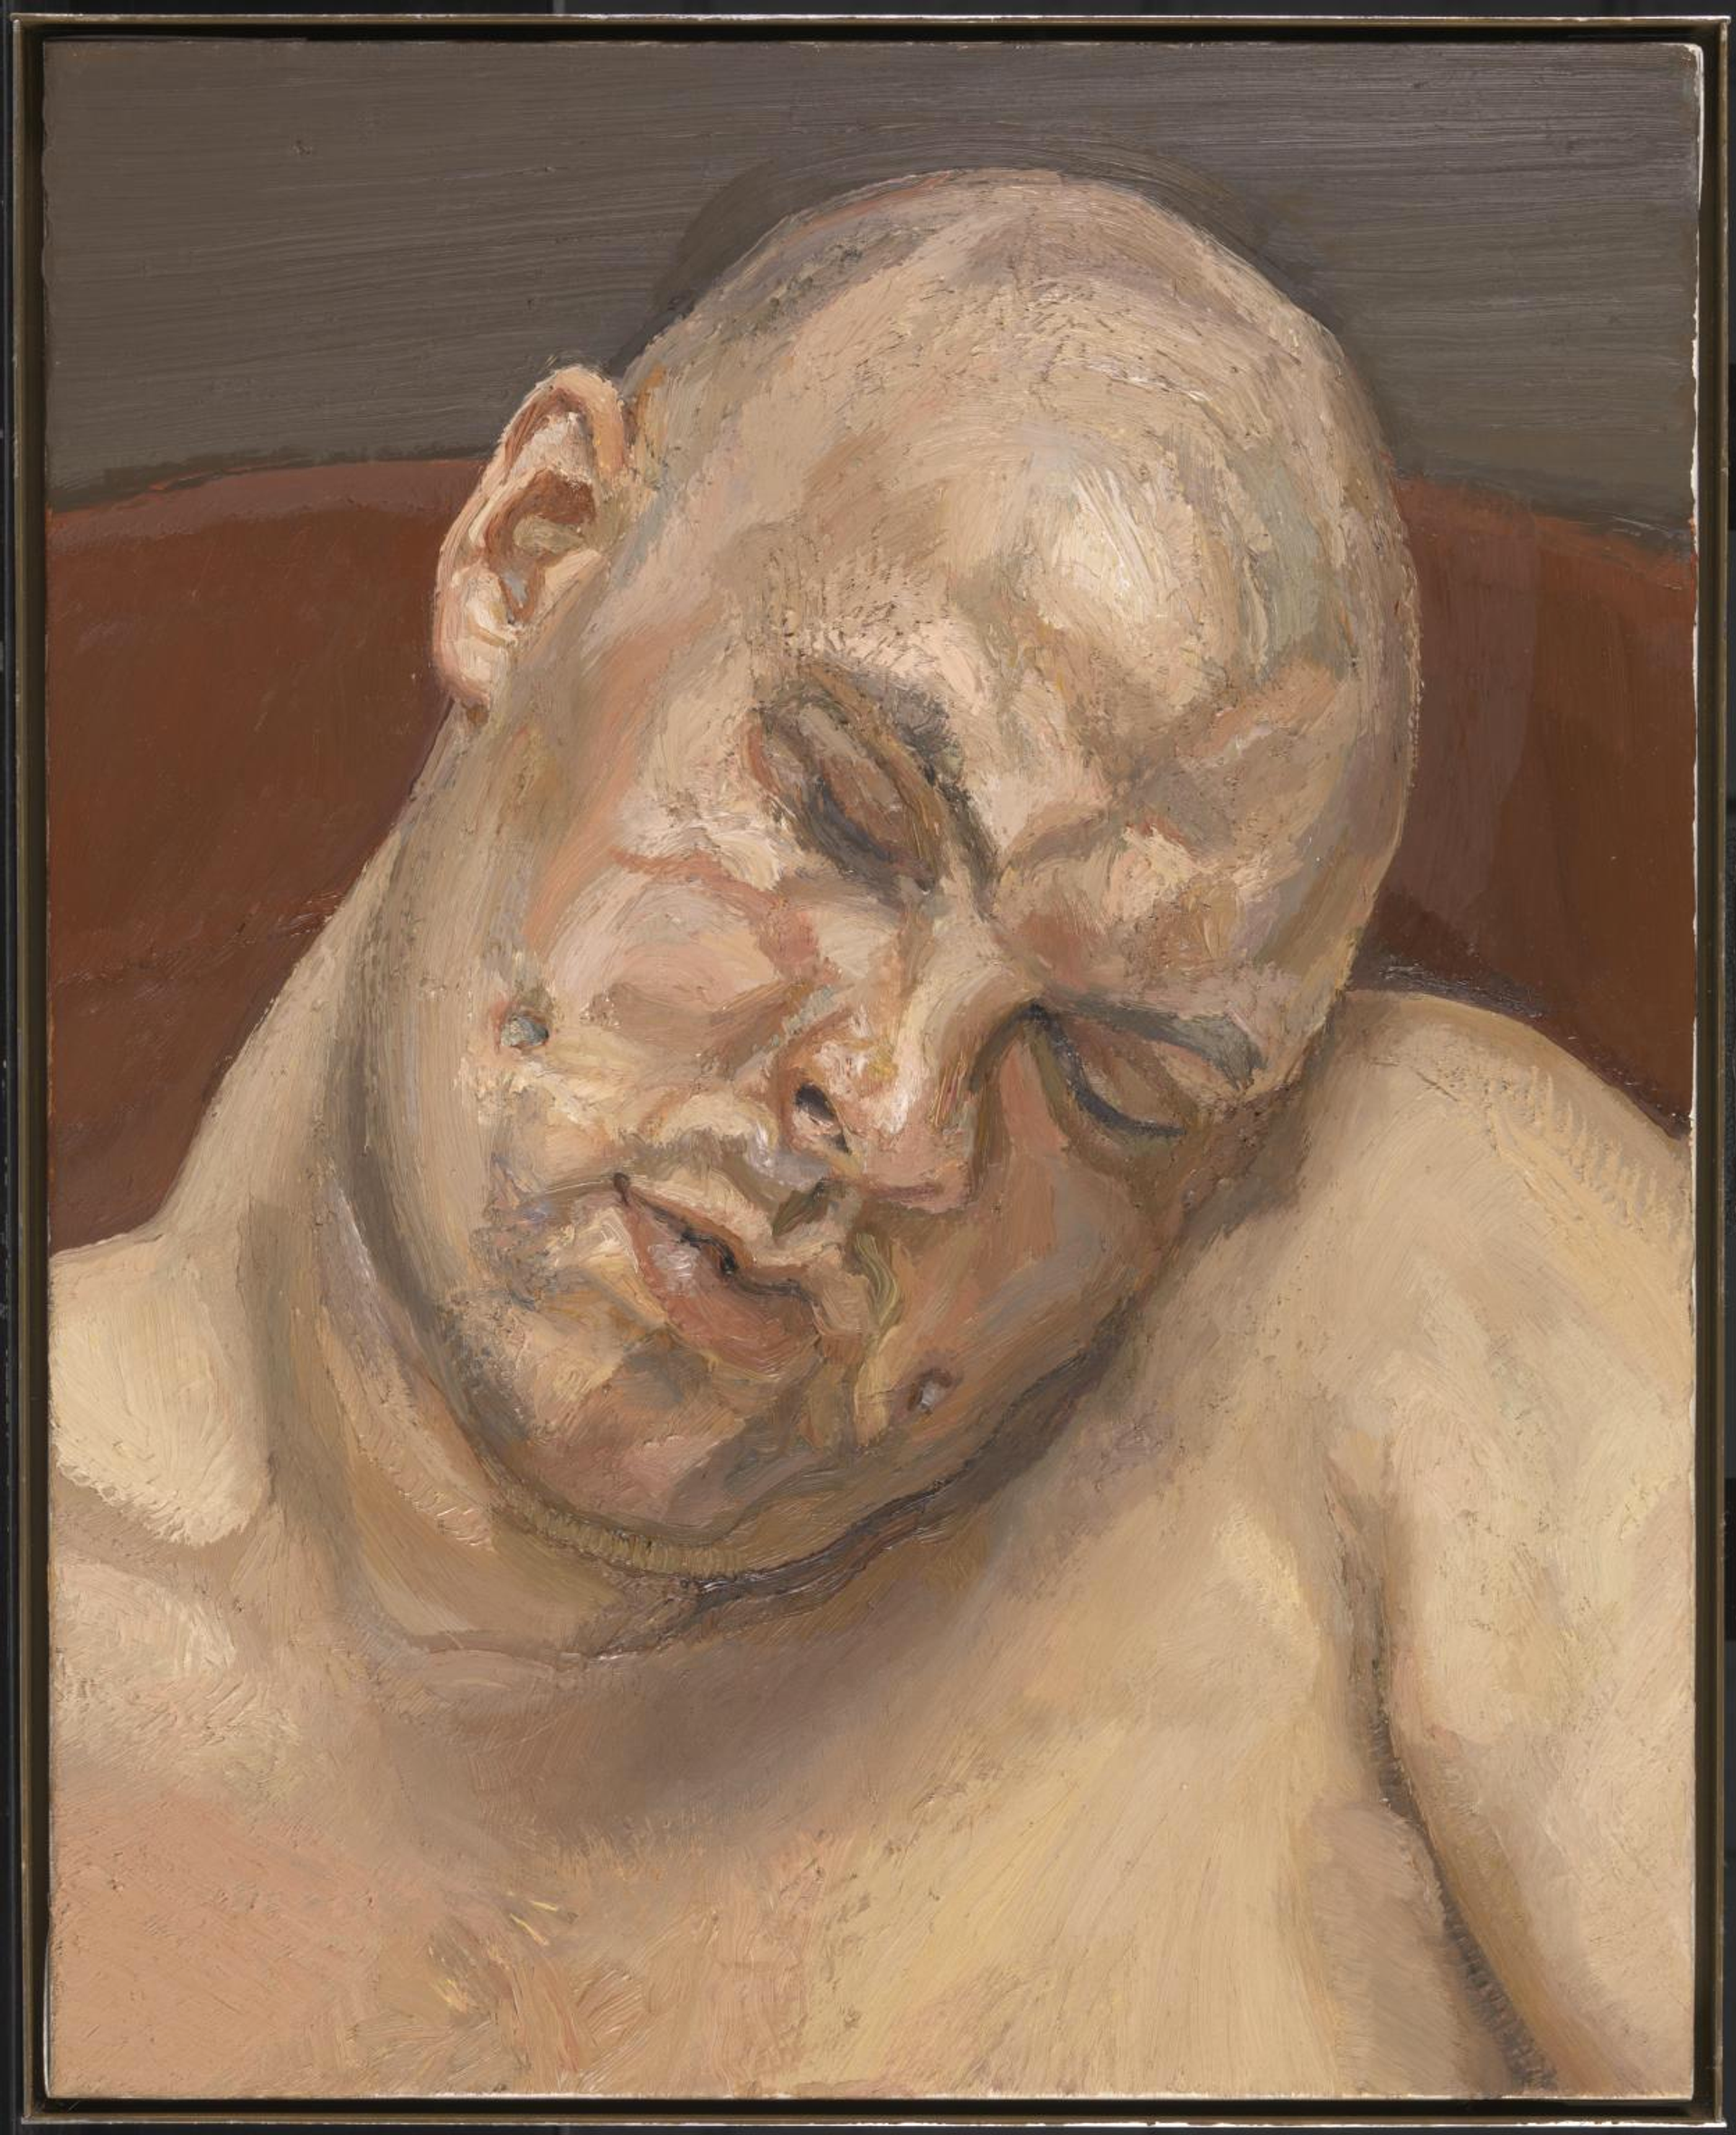 An image of the work Leigh Bowery by Lucian Freud. It shows a bald shirtless man who appears to be sleeping. The colour palette is muted and naturalistic.